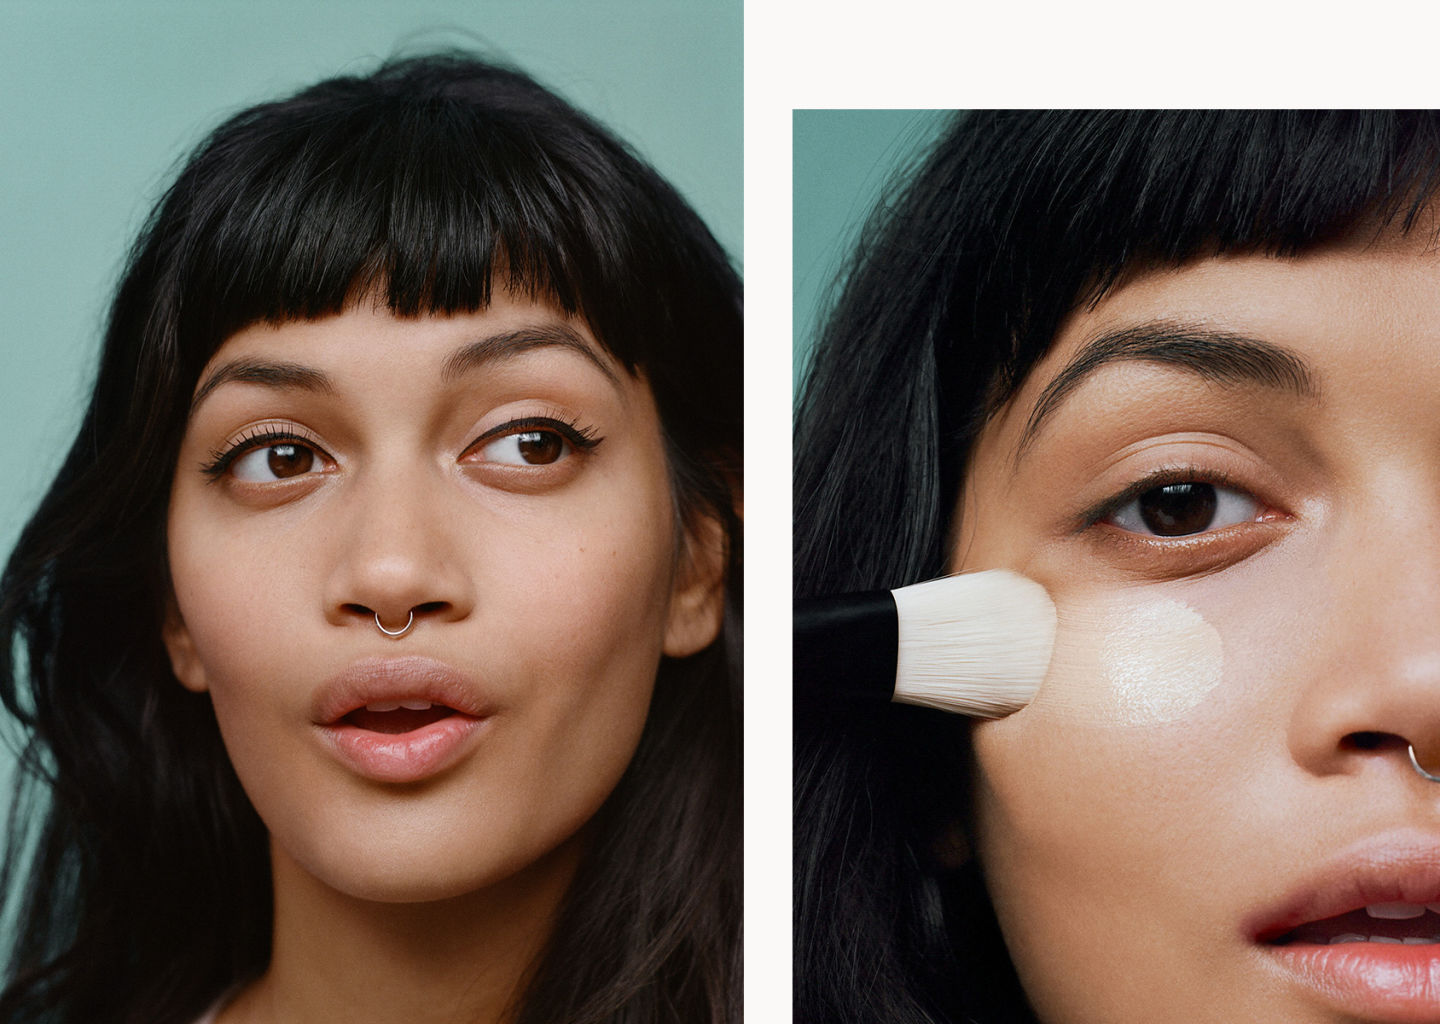 Three beauty hacks to get the perfect base